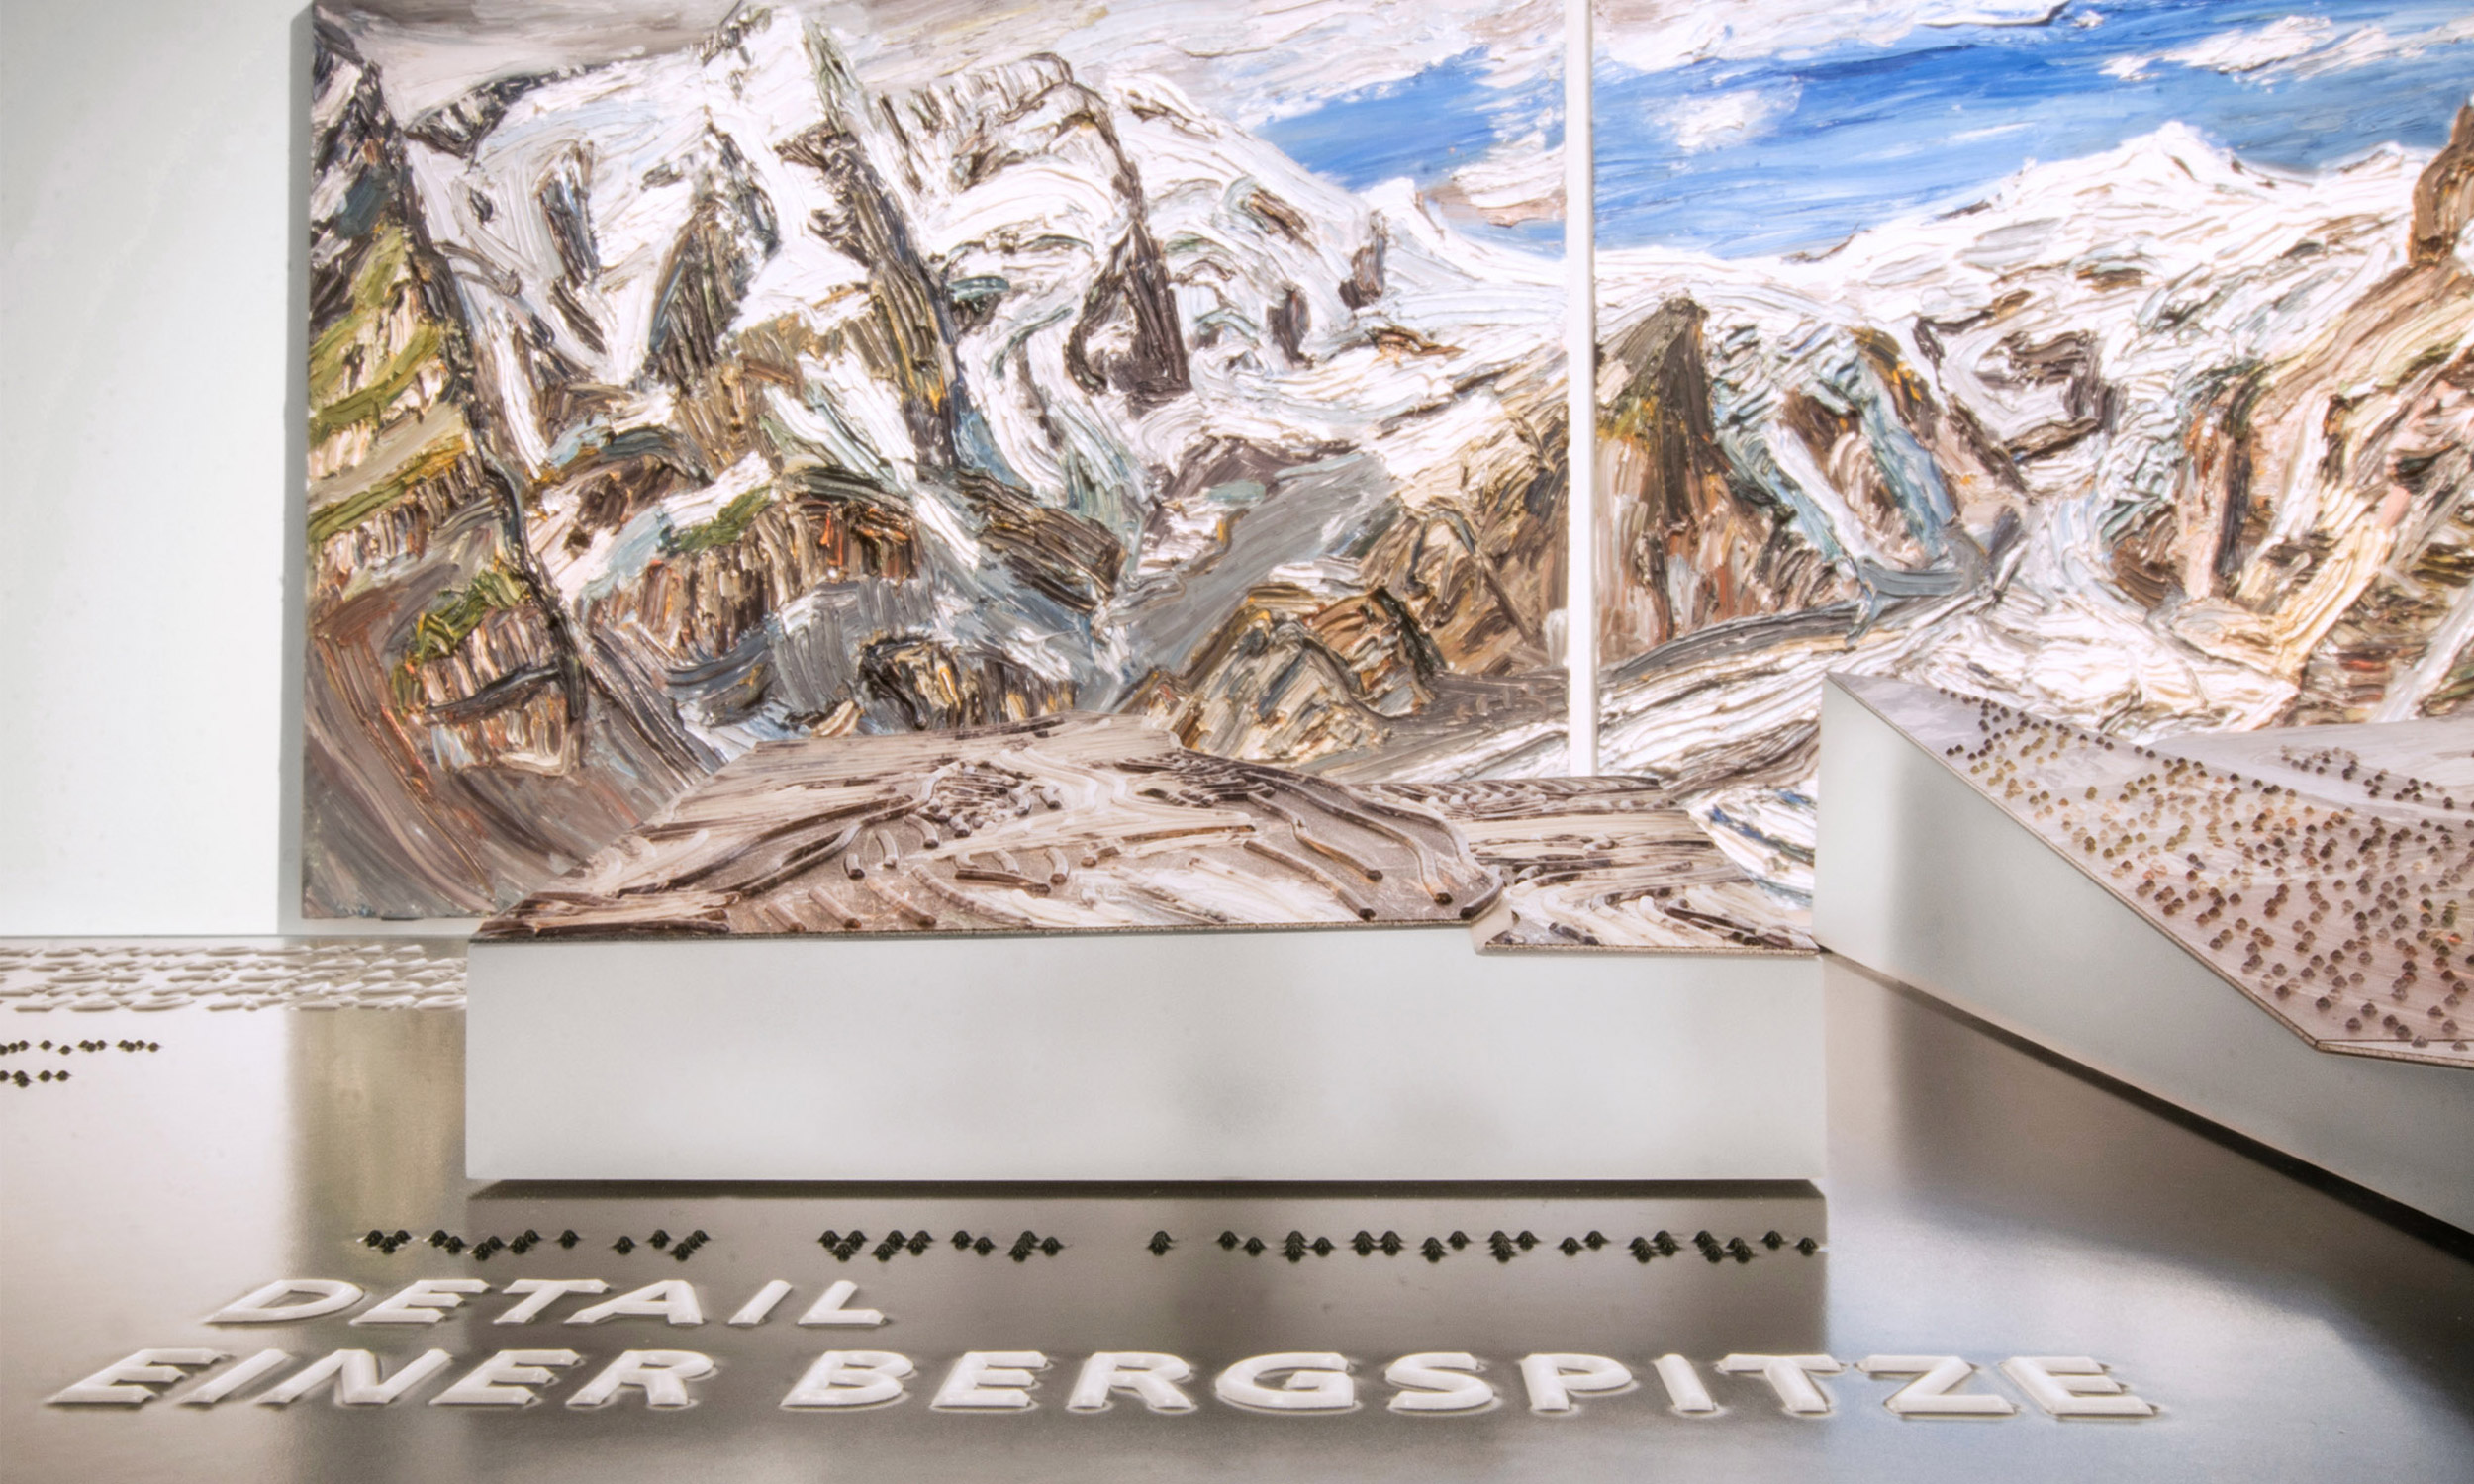 Here you can see a detail of the tactile touch object and on the walls behind it you can see the painting "Bergwelten".